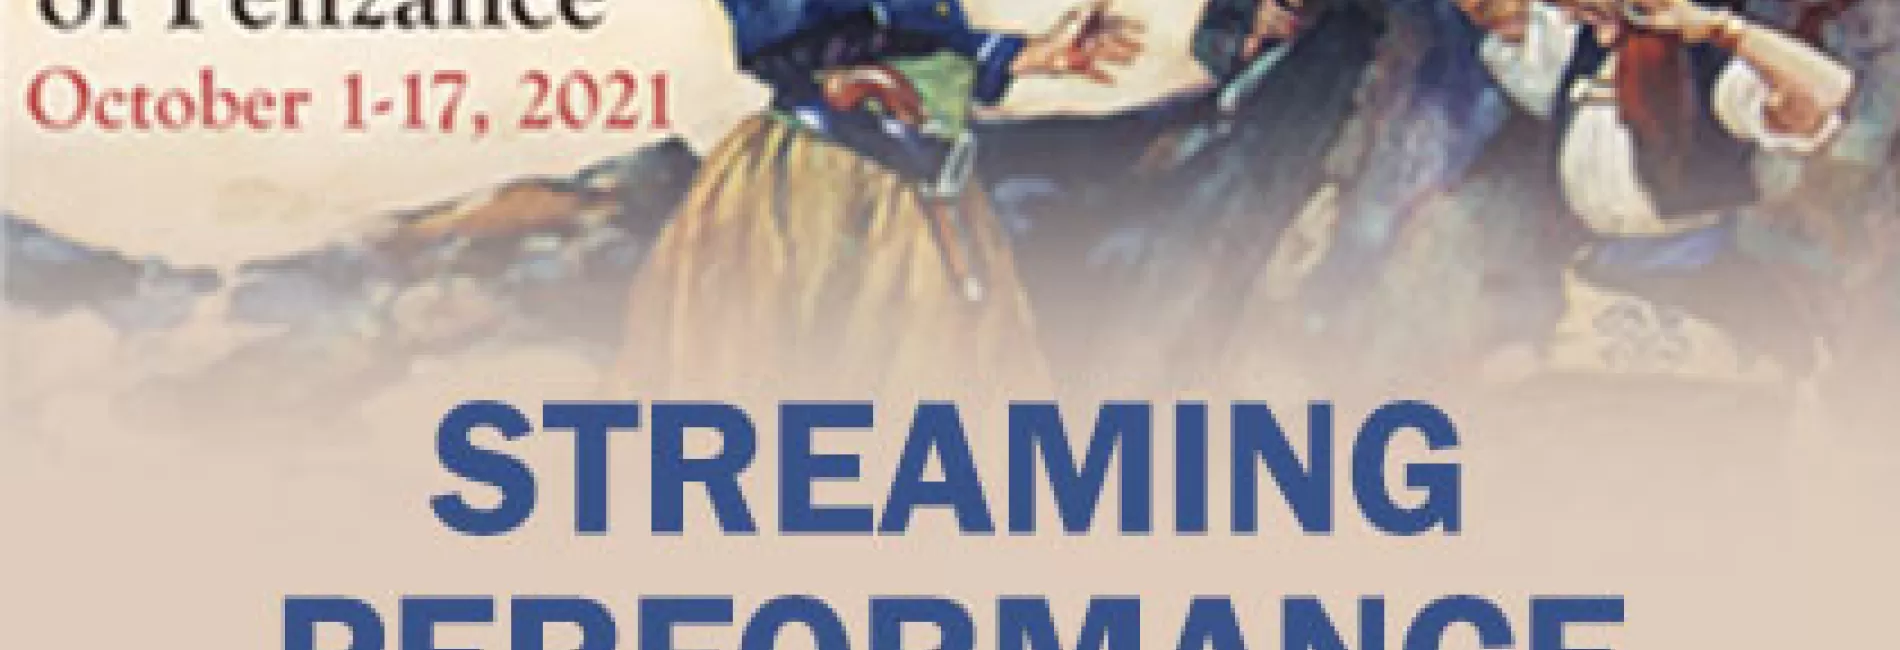 Pirates of Penzance: Streaming Package